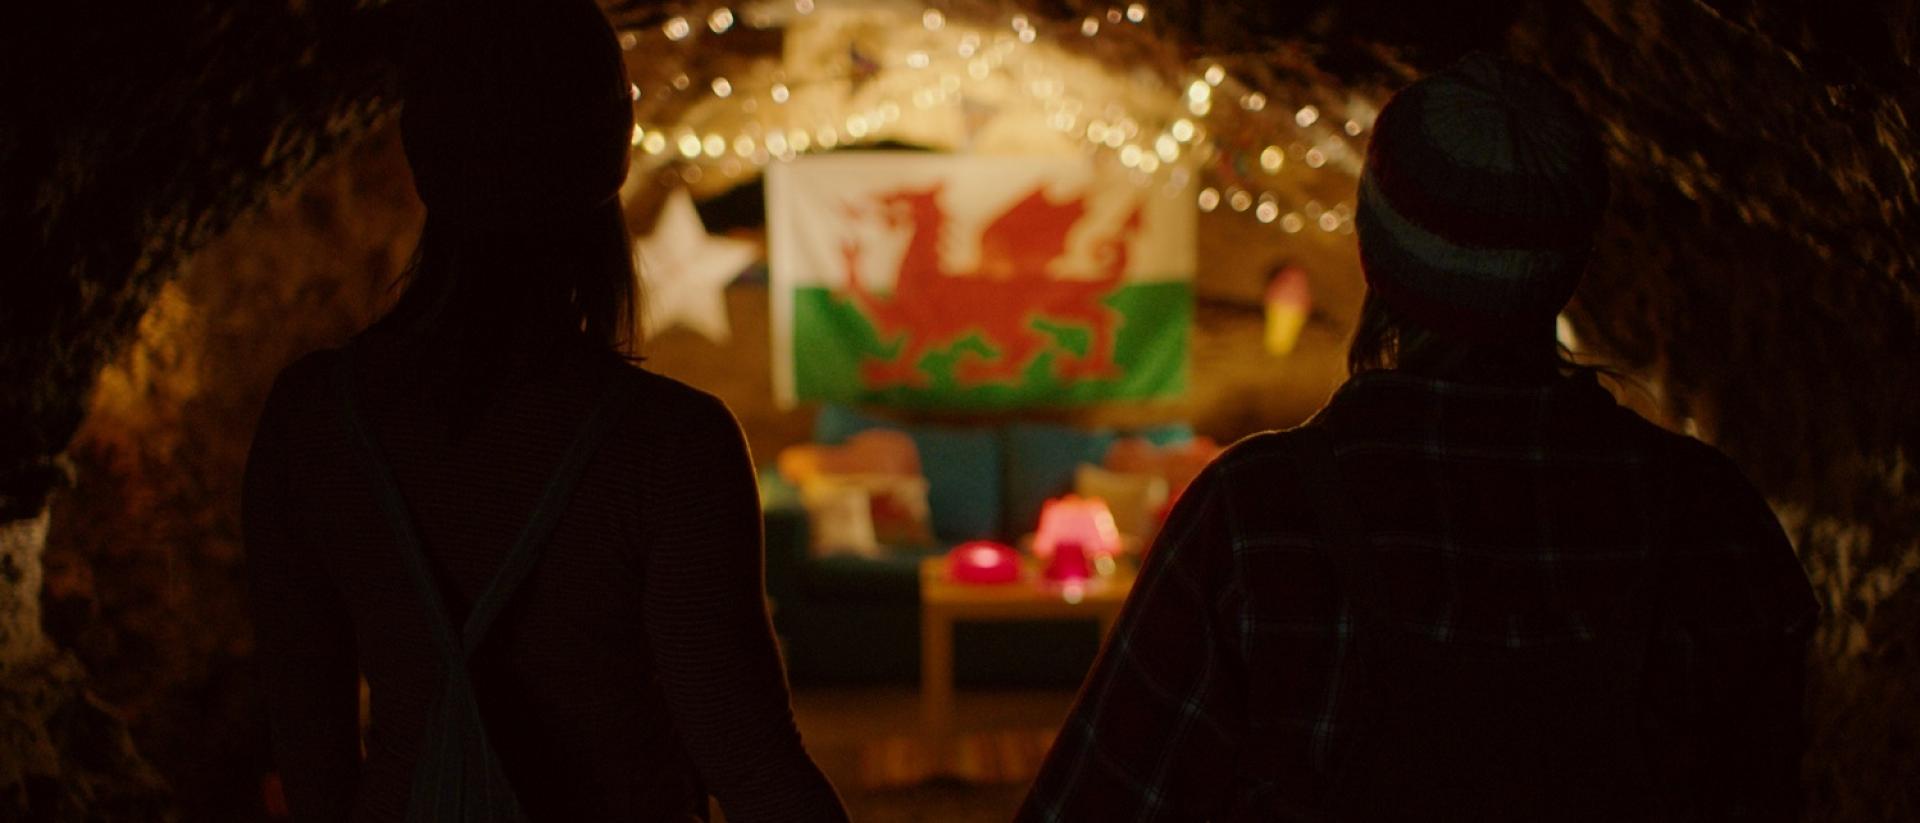 still from jelly featuring two people standing in a cave and holding hands while they look at a welsh flag on the wall, decorated with fairy lights